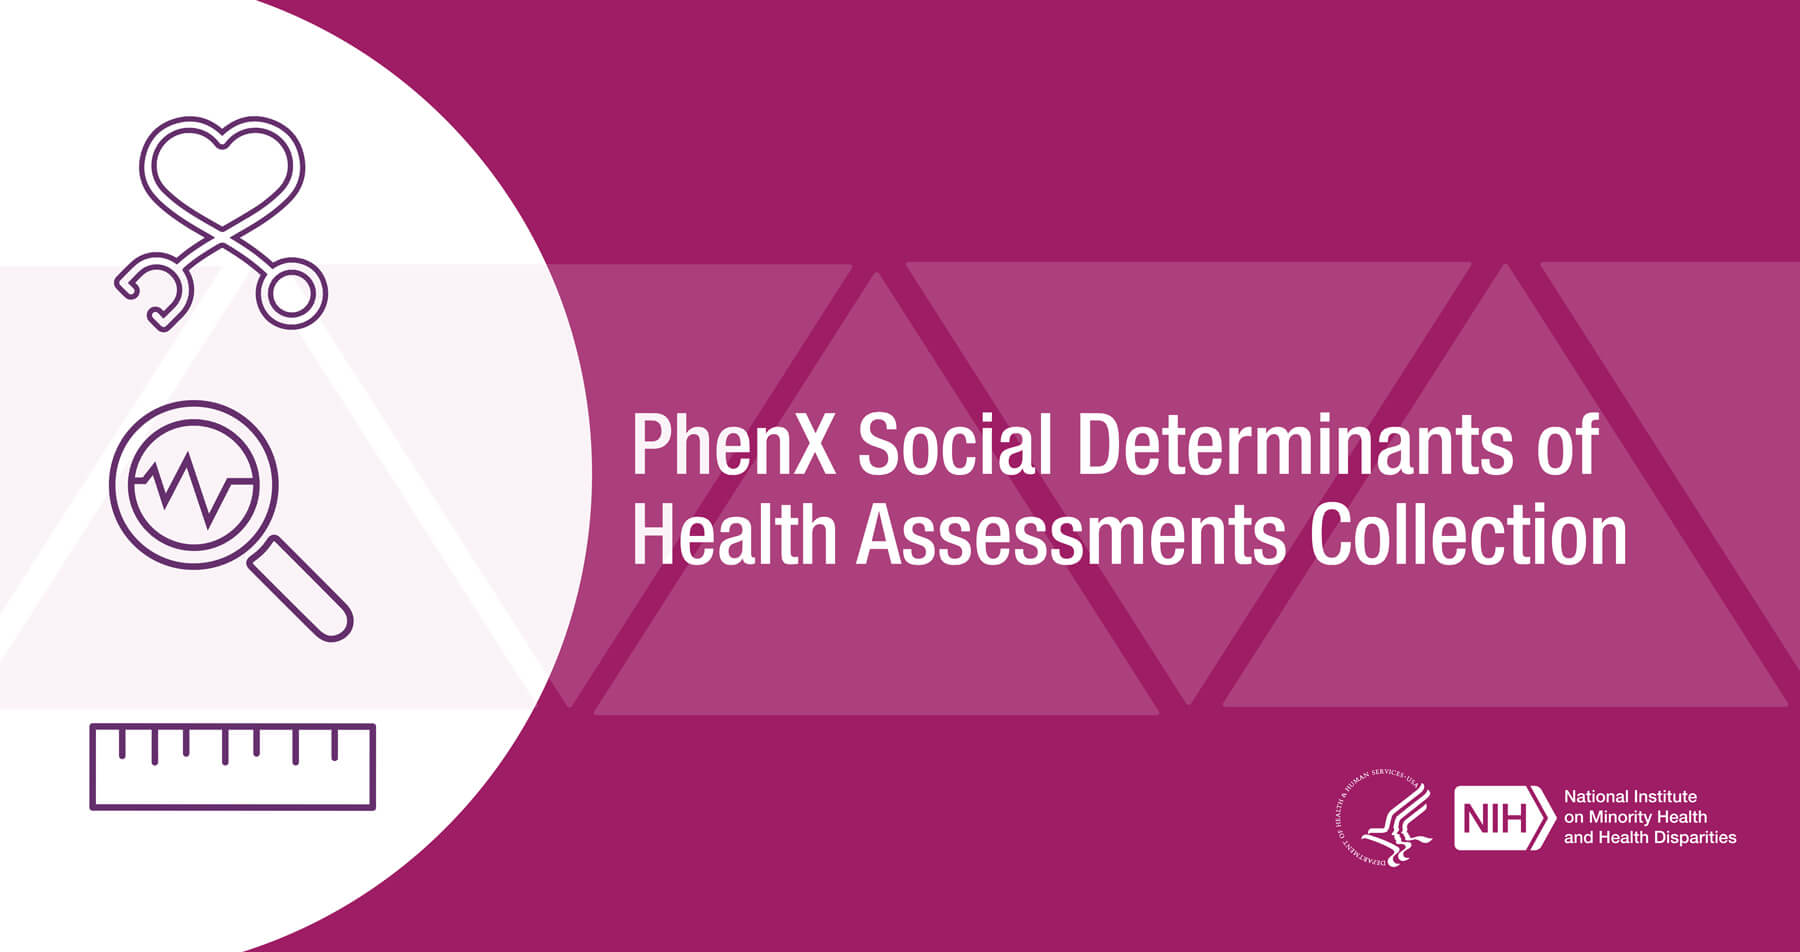 PhenX Social Determinants of Health Assessments Collection